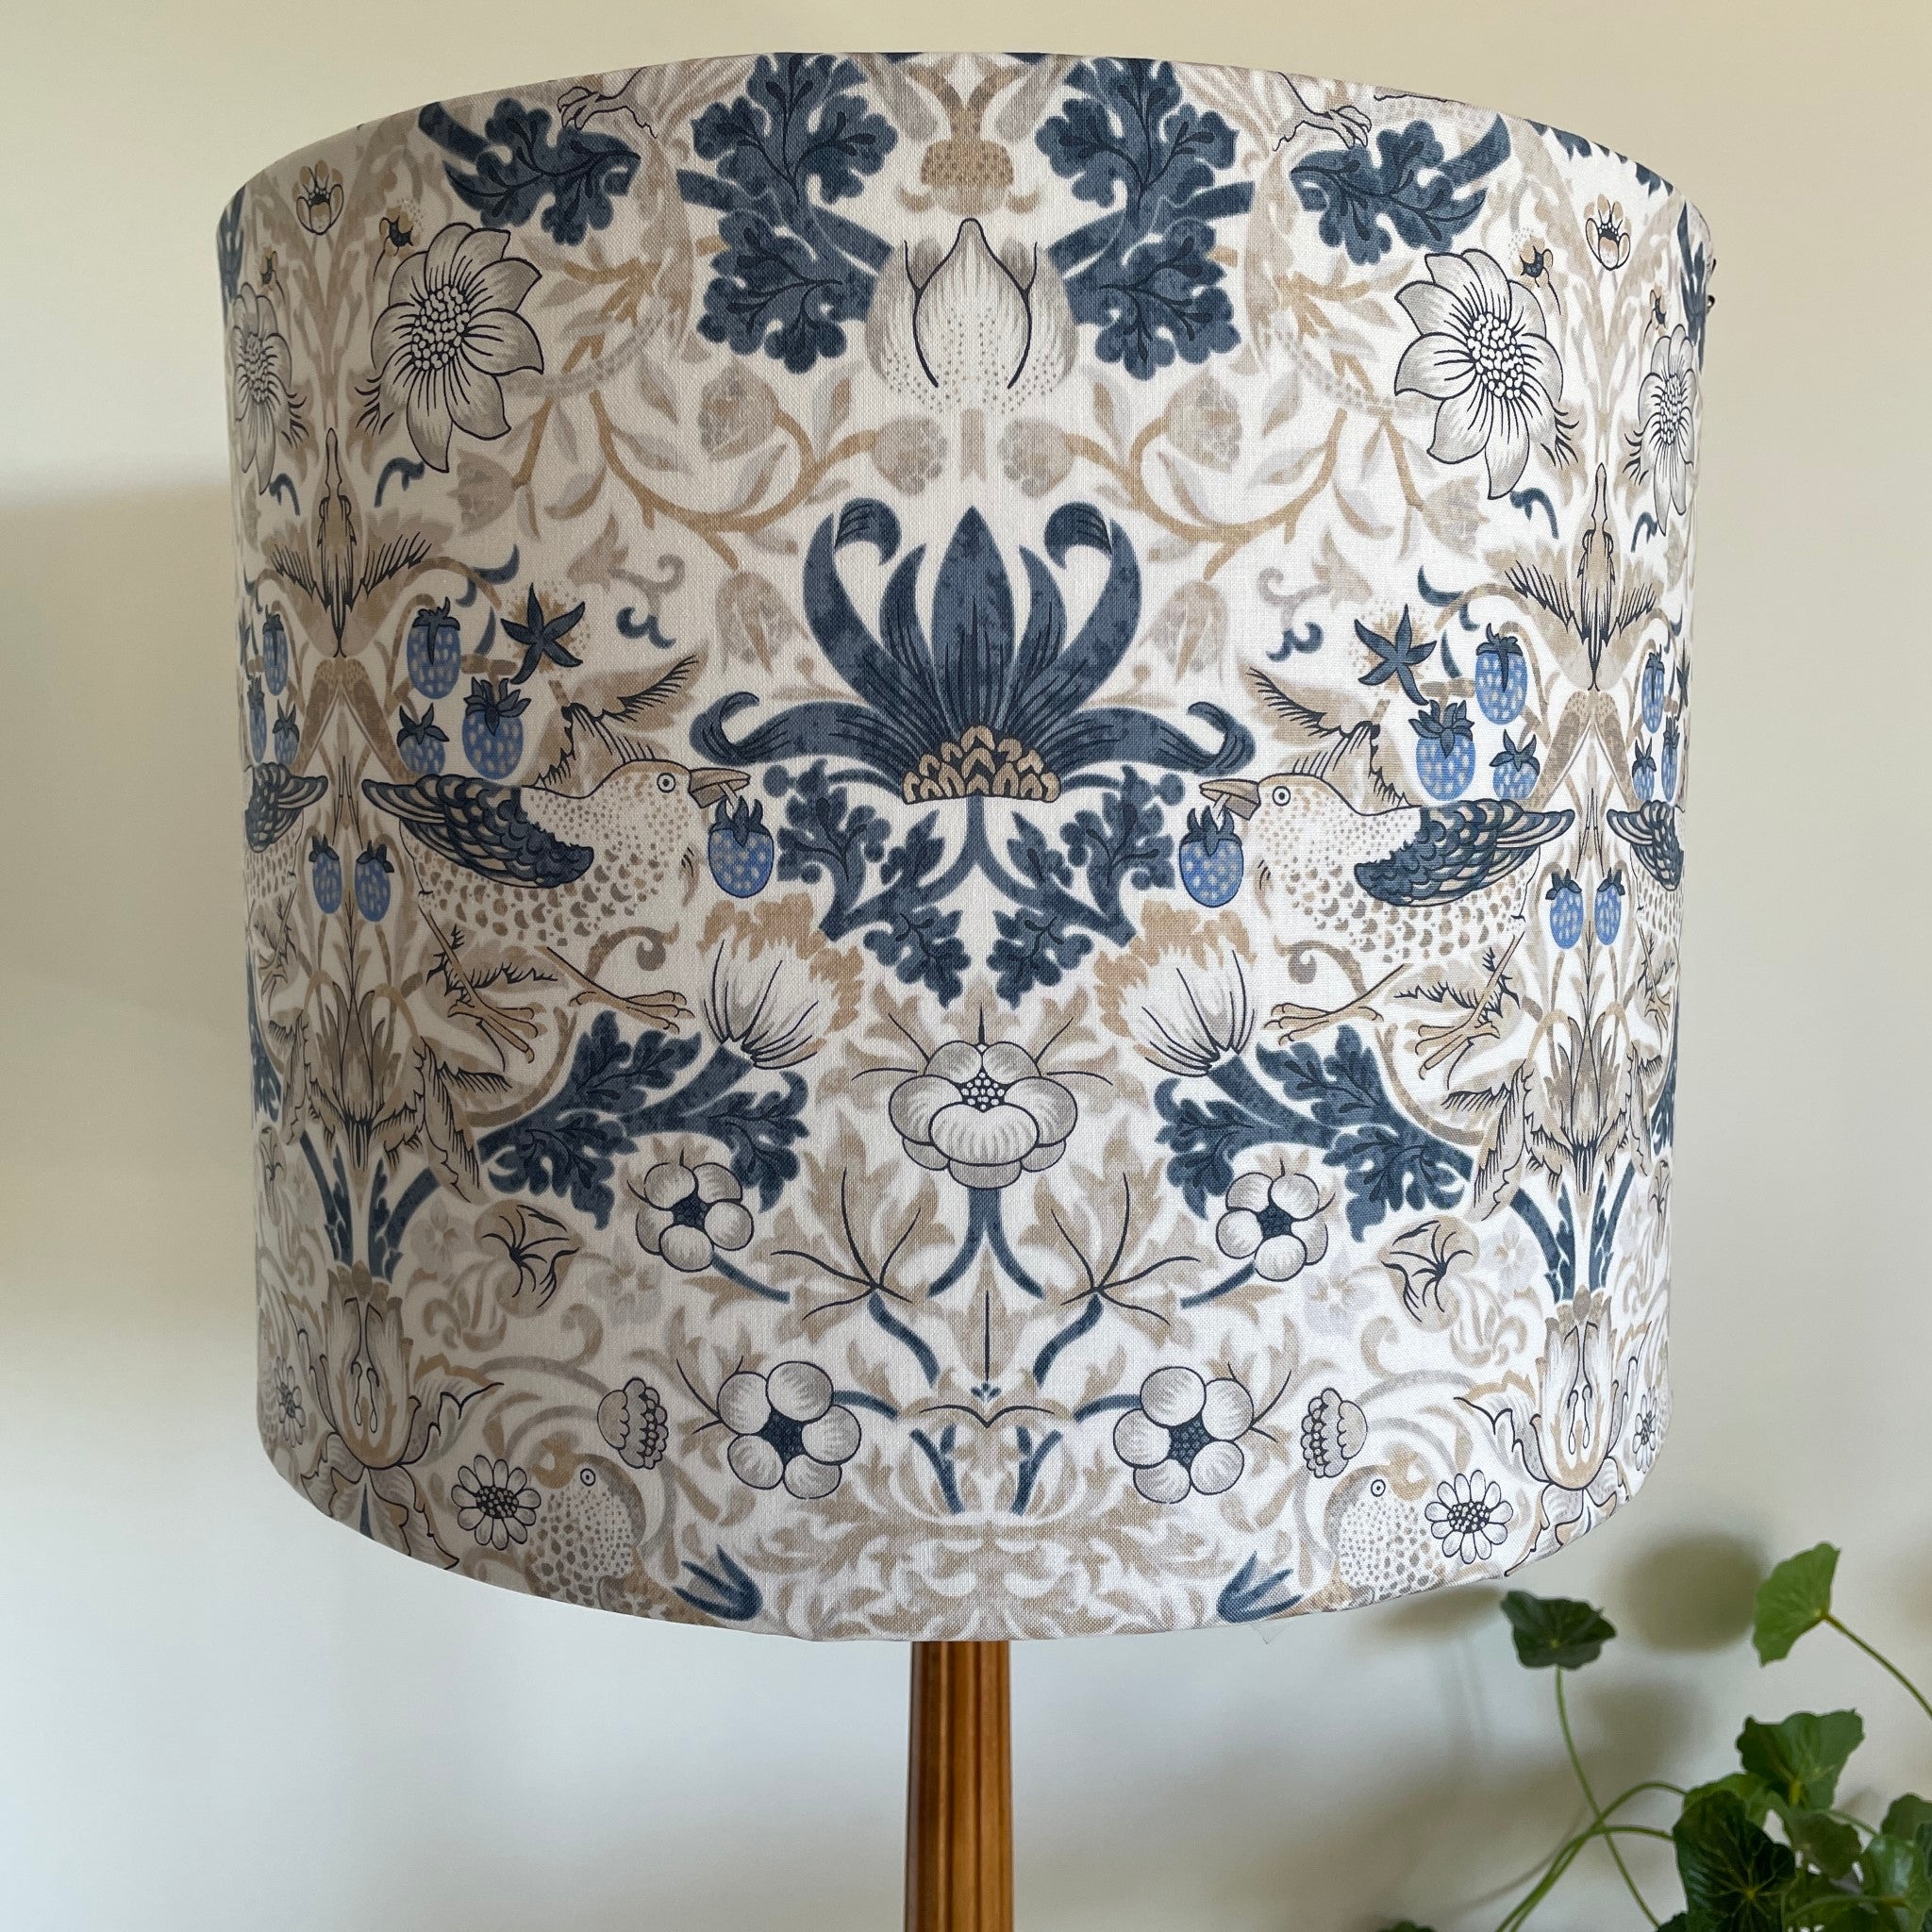 Large drum handcrafted lamp shade with William Morris fabric, unlit.